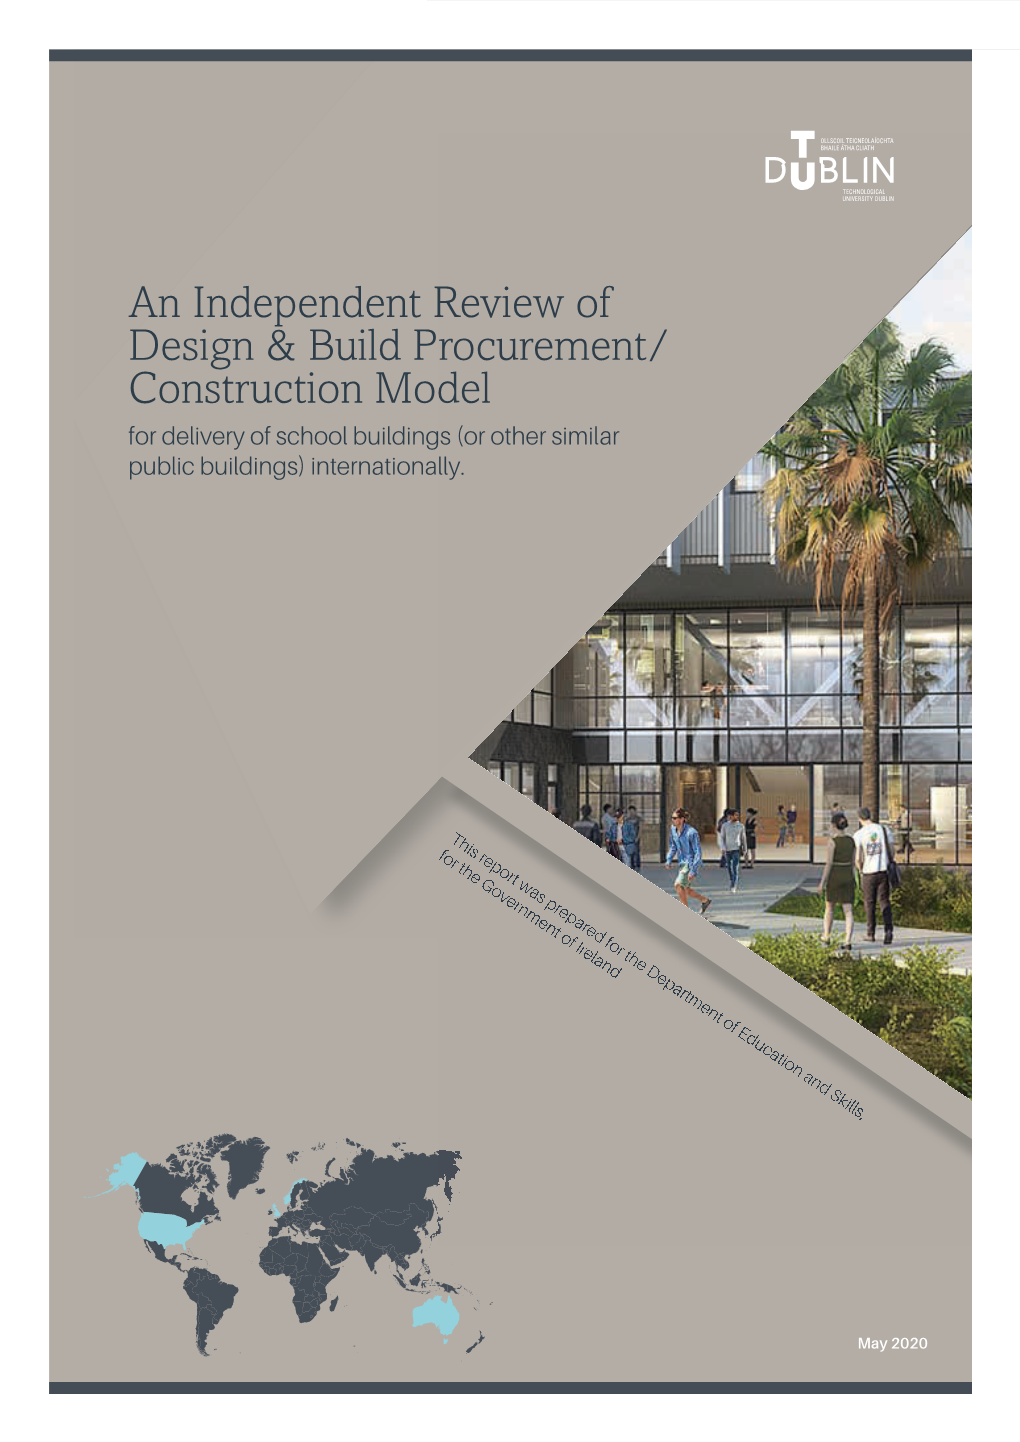 An Independent Review of Design & Build Procurement